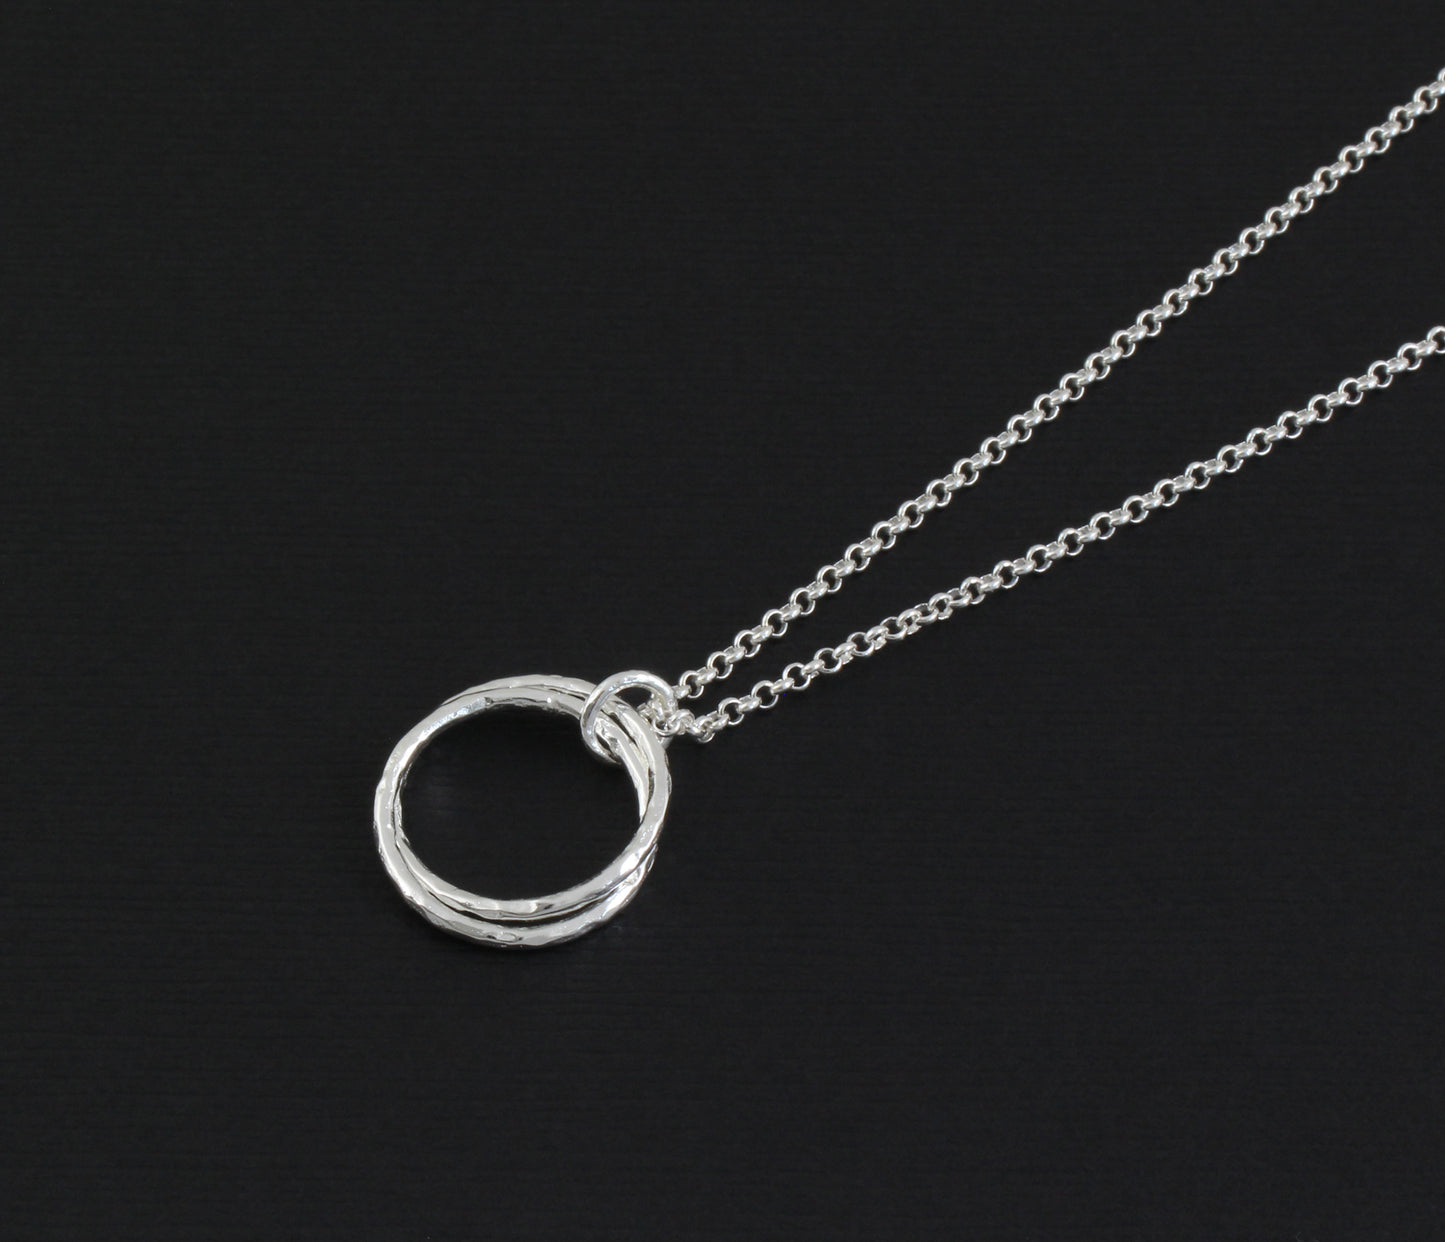 Father and Daughter Gift - The Love Between Last Forever - Hammered Linked Infinity Ring Necklace